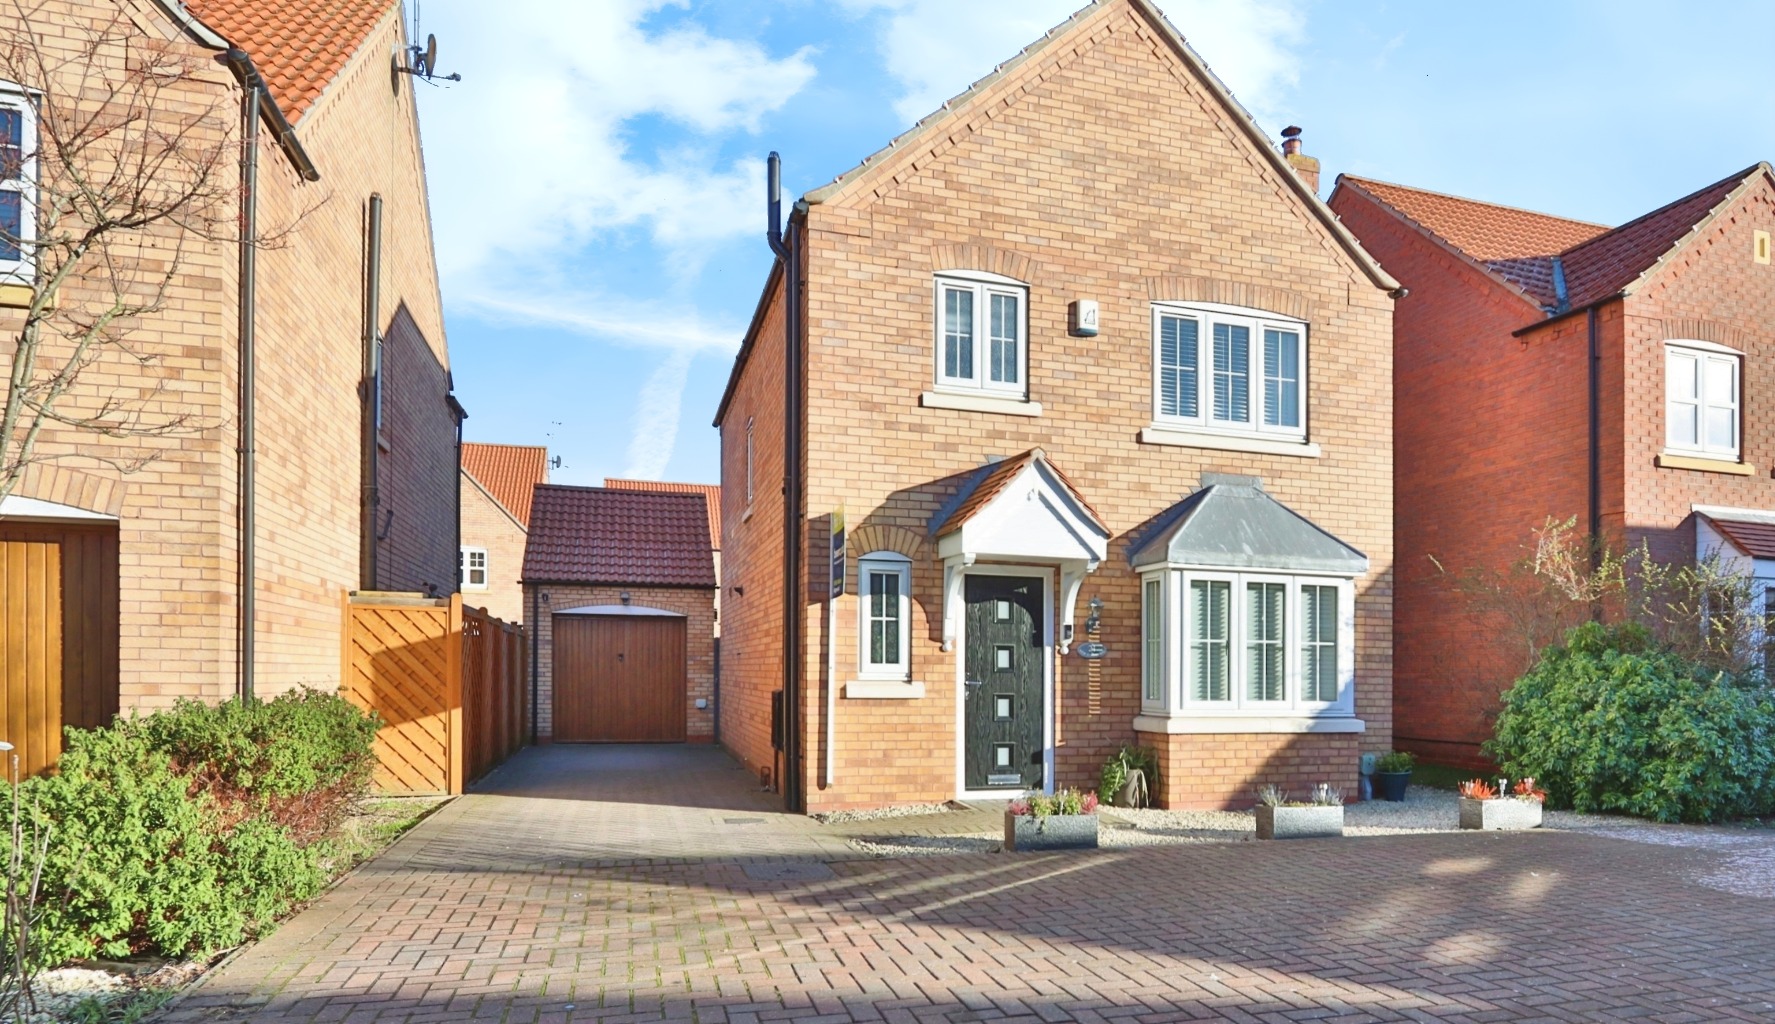 3 bed detached house for sale in New Forest Way, Hull - Property Image 1